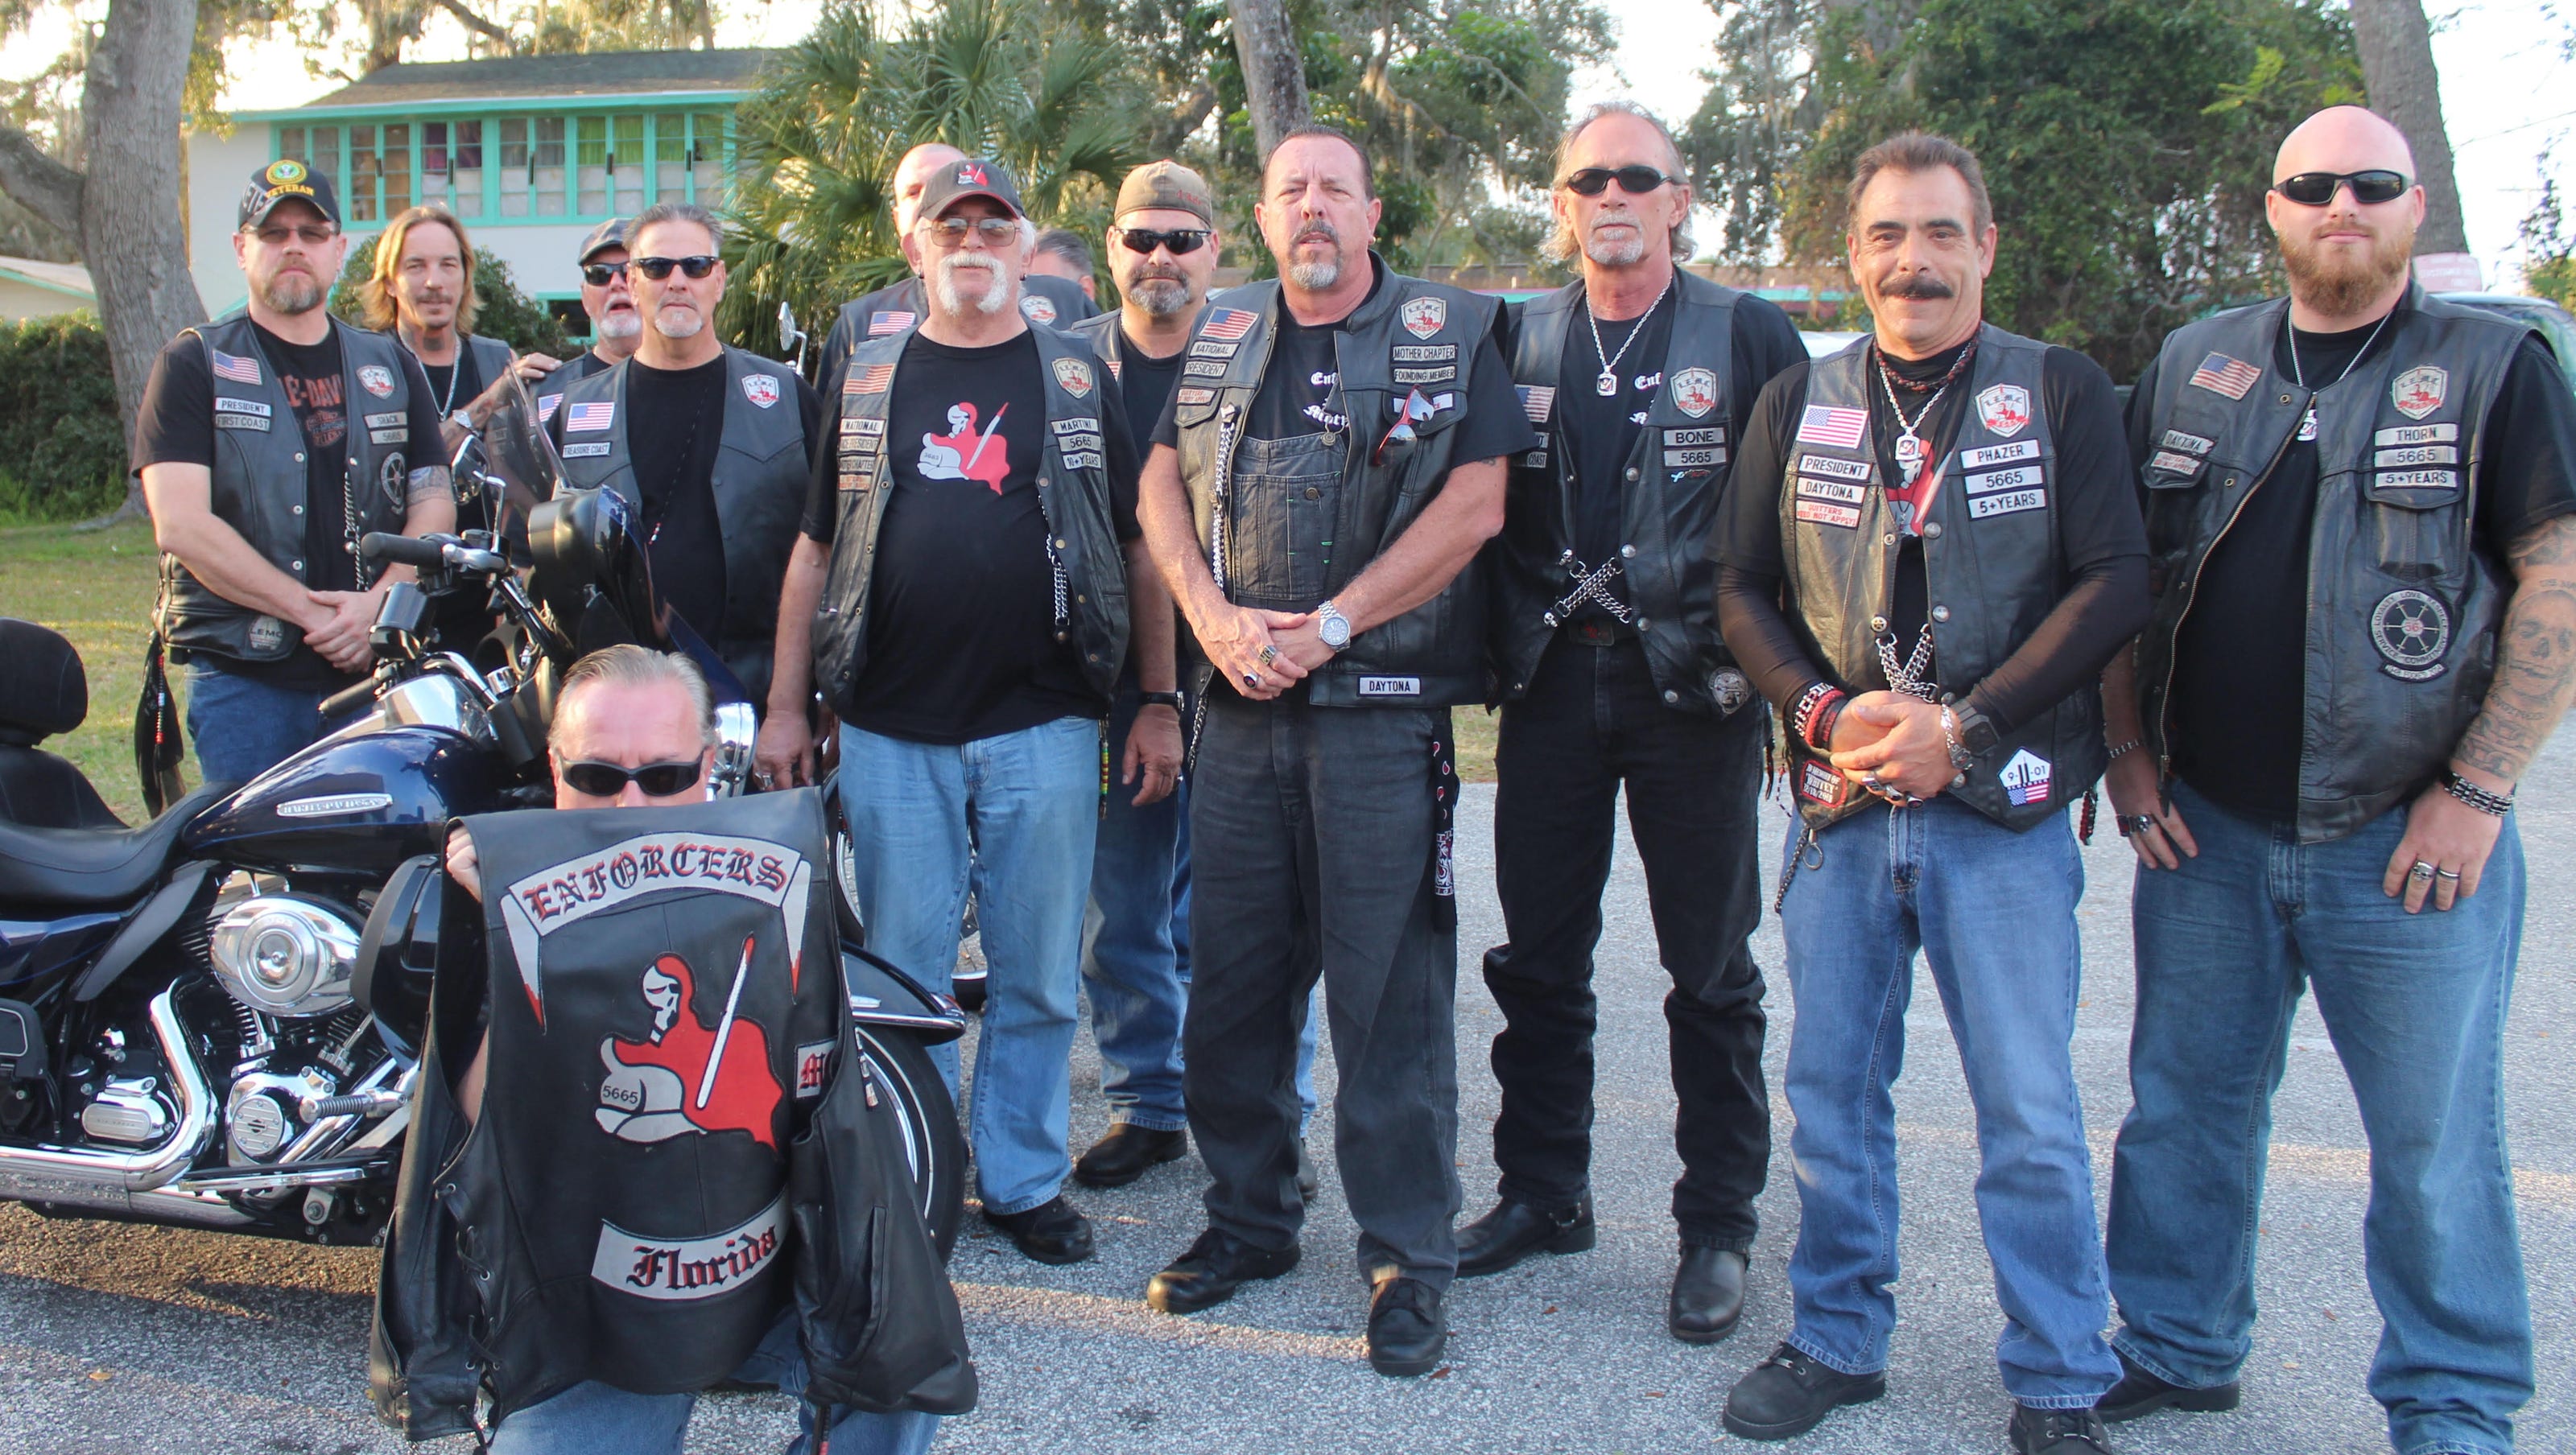 Enforcers Motorcycle Club has a Holly Hill clubhouse. Here's who they are.